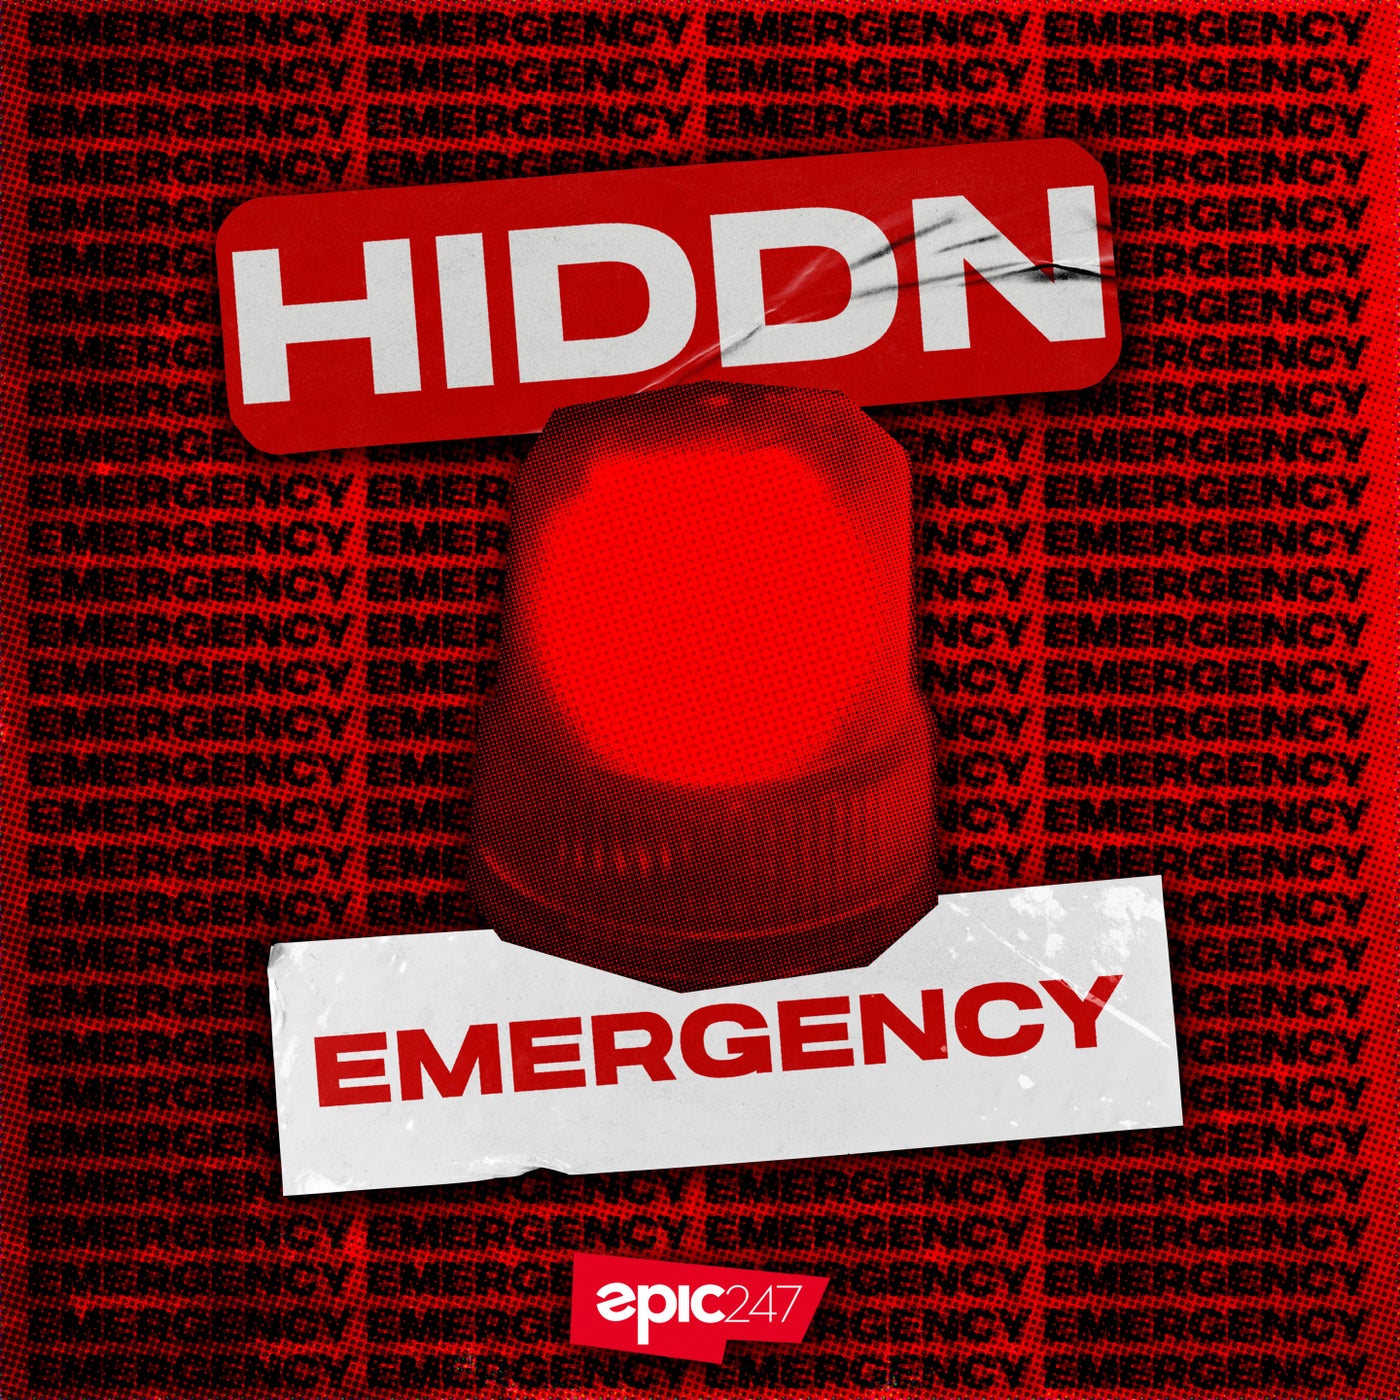 Emergency (Extended Mix)